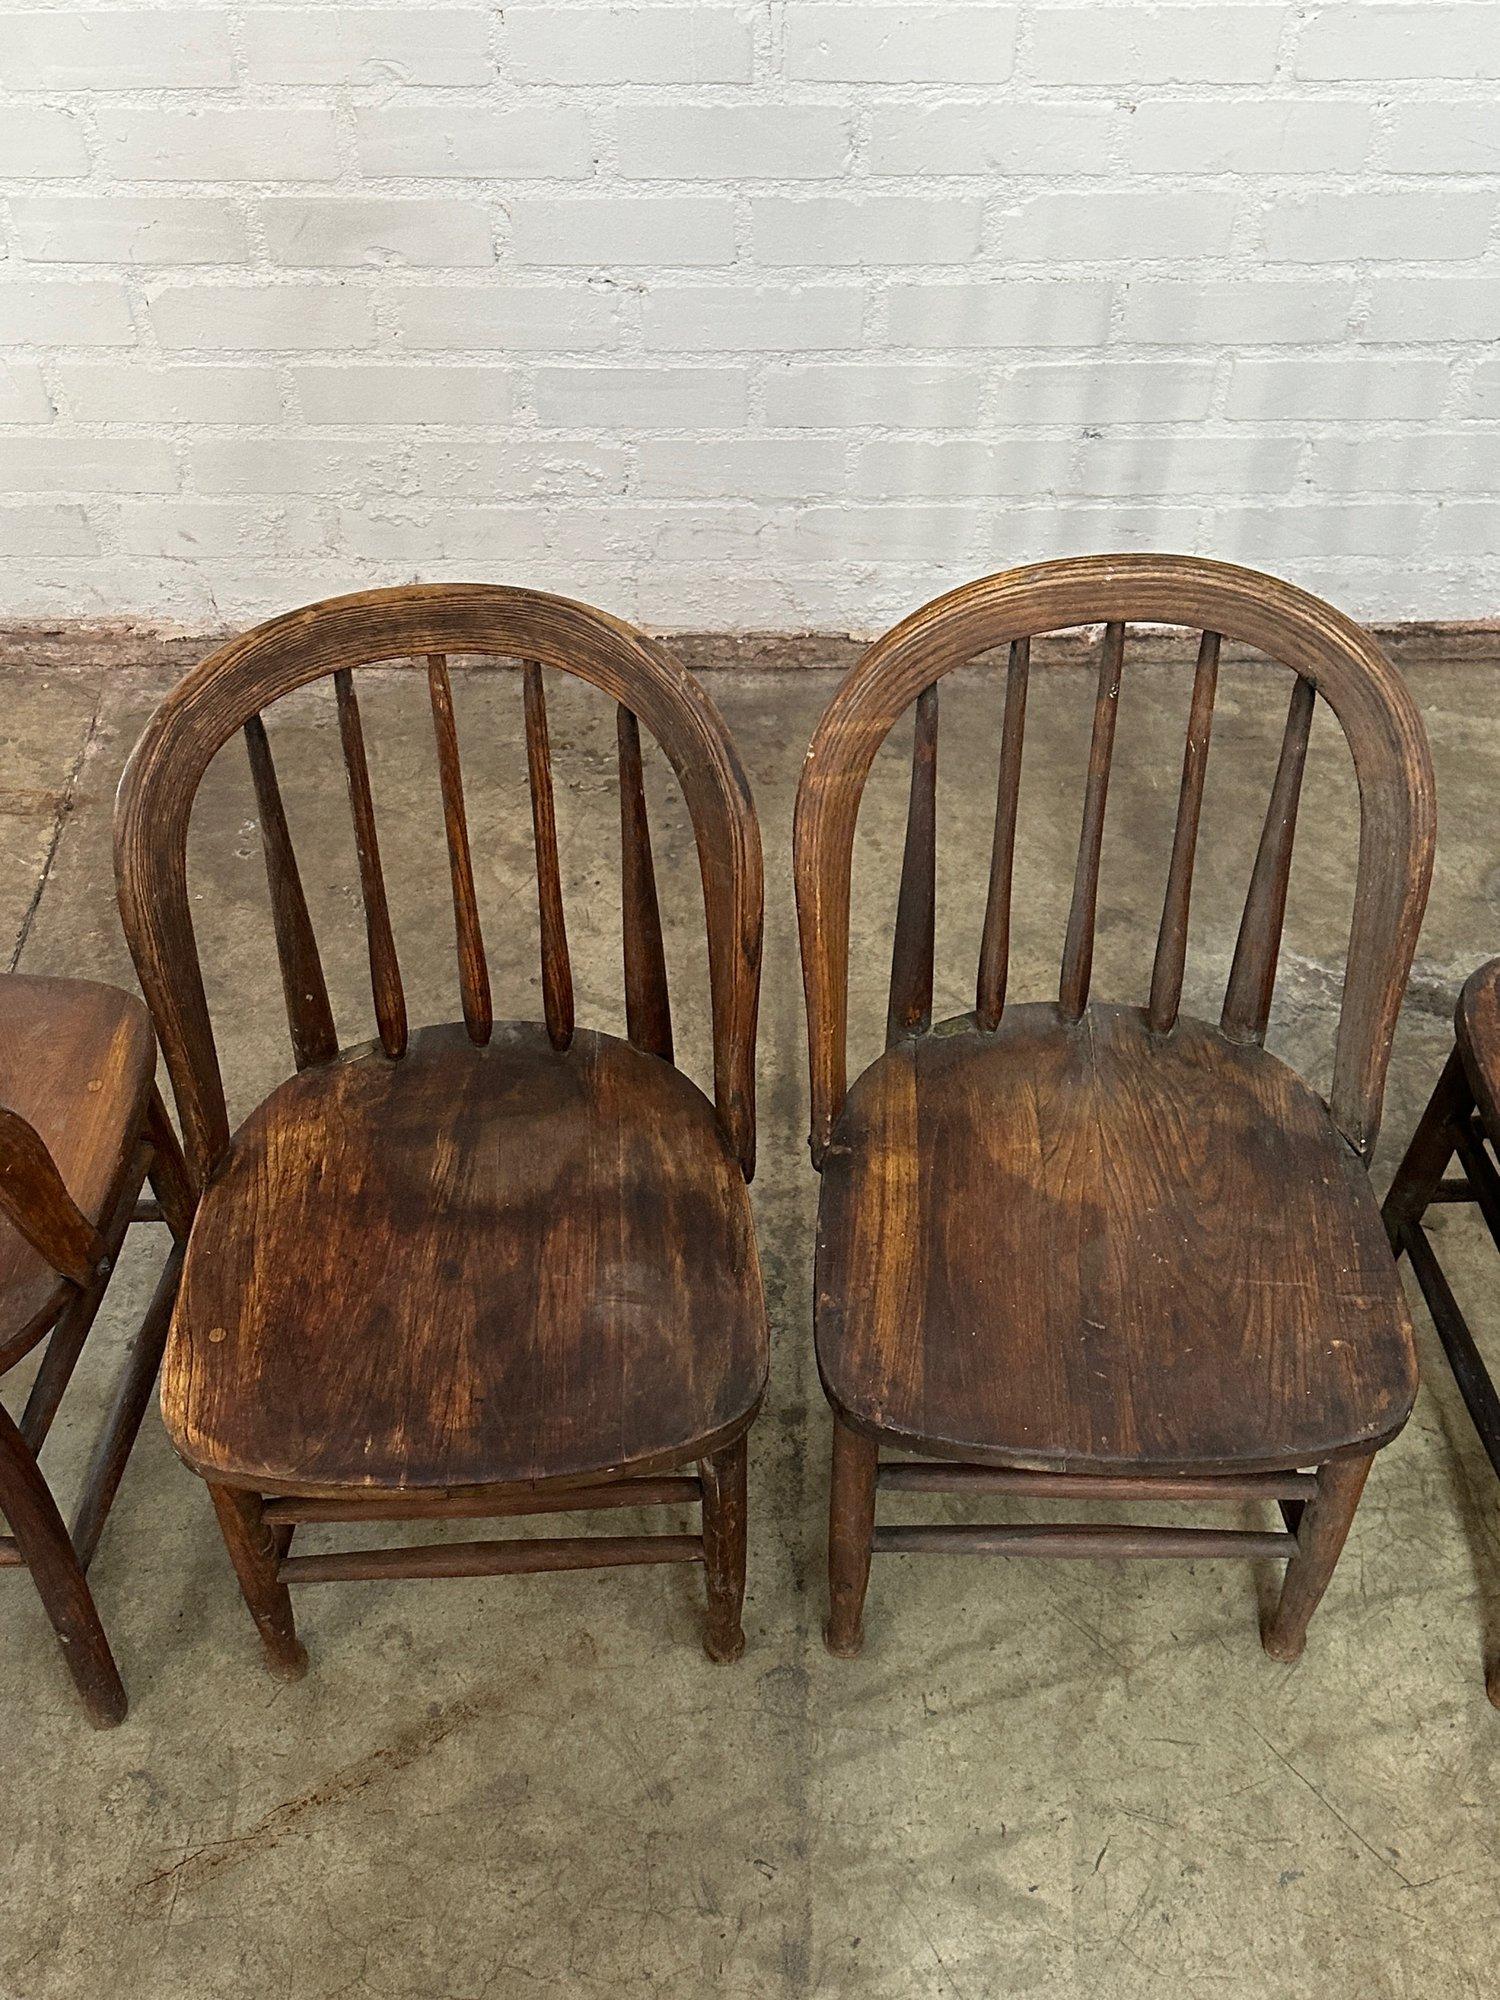 Vintage Farmhouse Spindle Chairs 14